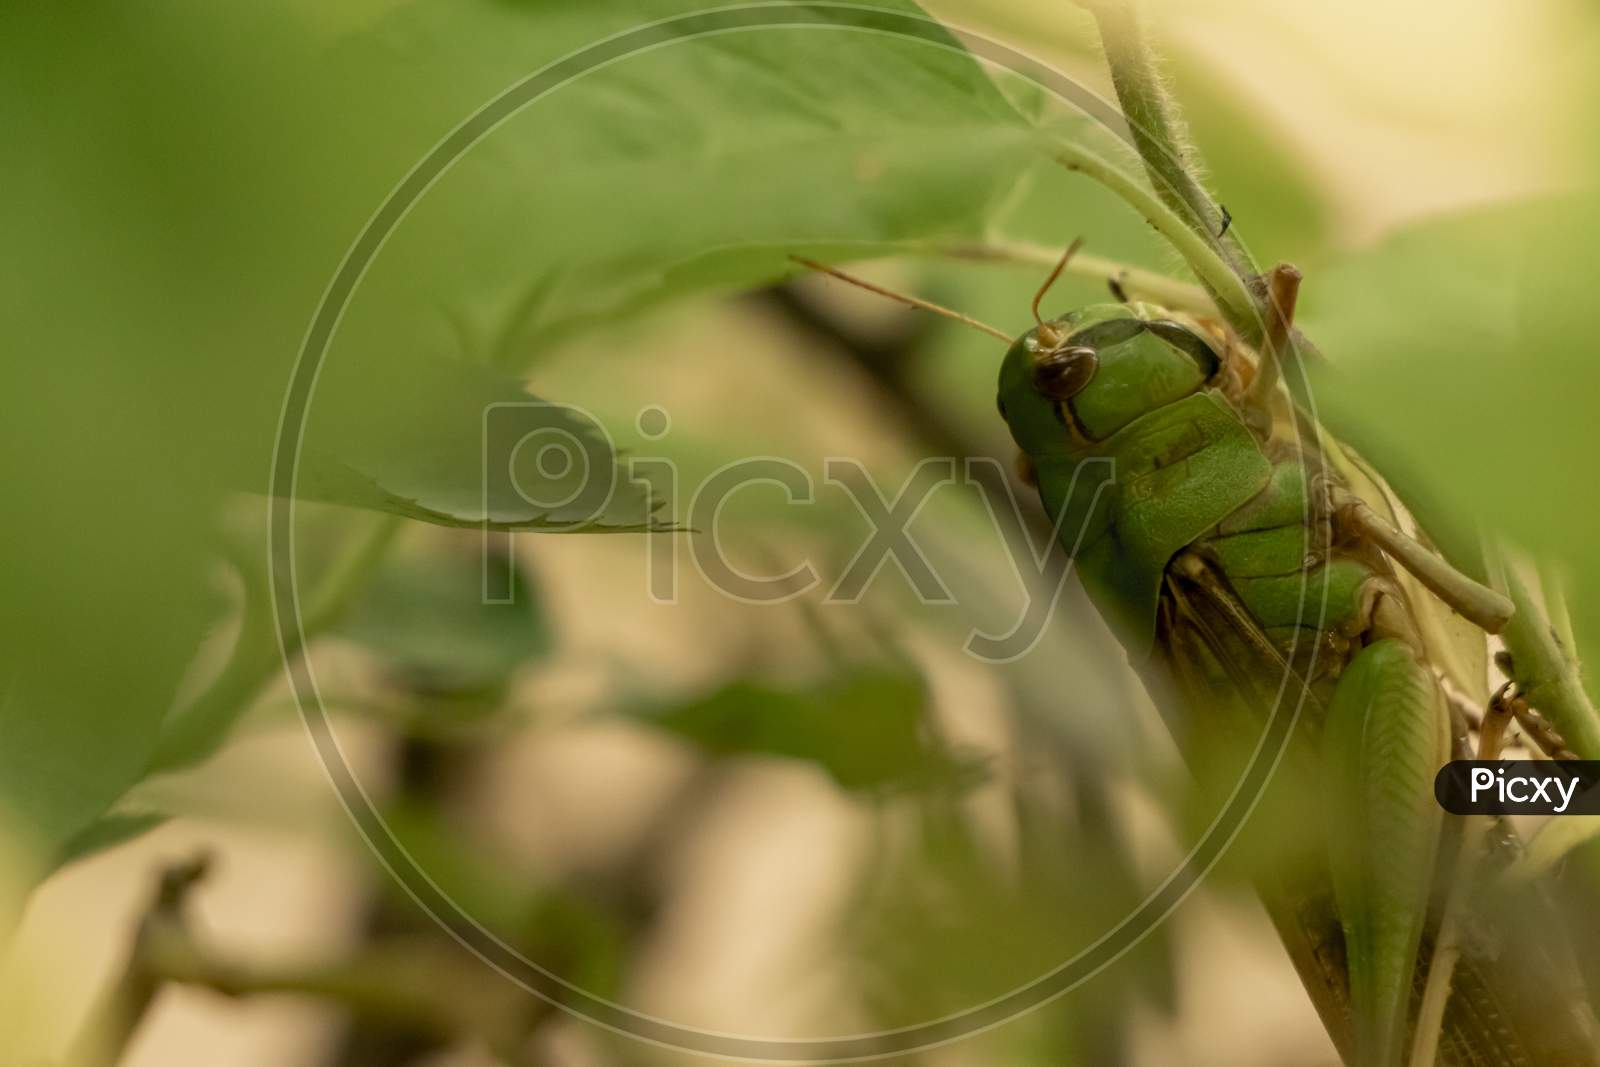 Grasshopper talking camouflage in green leaves